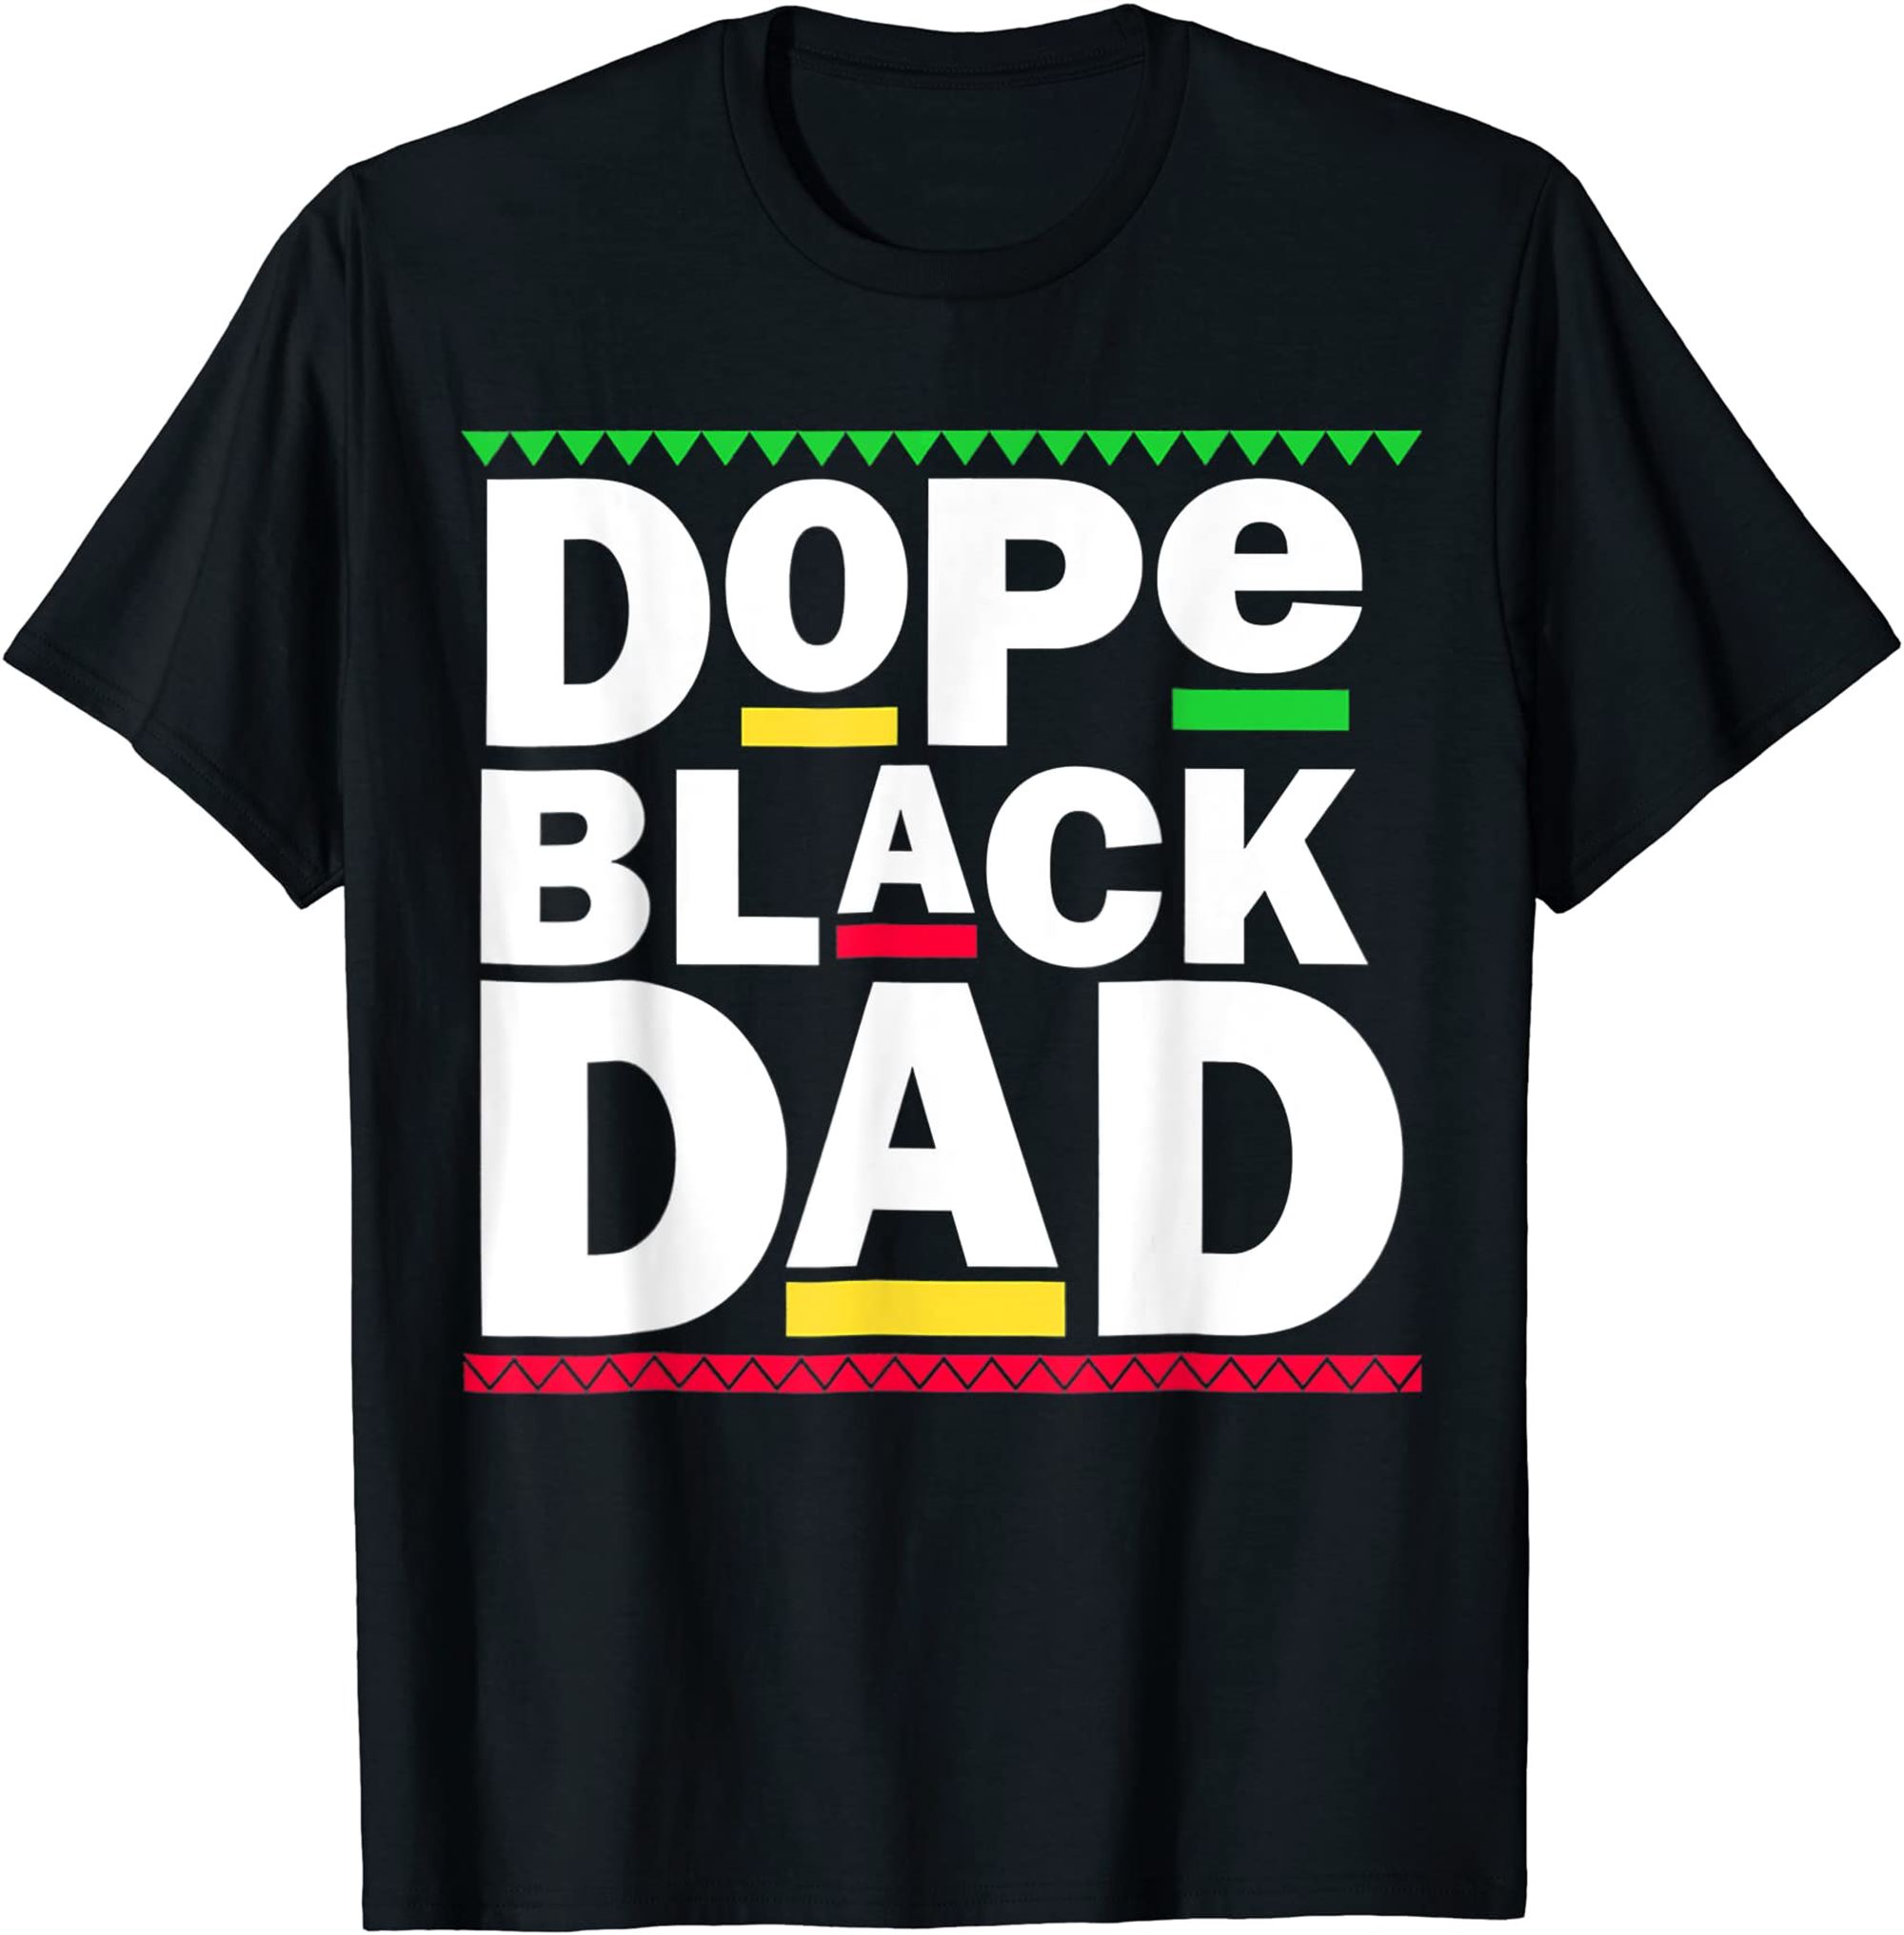 Dope Black Dad Junteenth Menalin African Mens Fathers Day T-shirt Full Size Up To 5xl